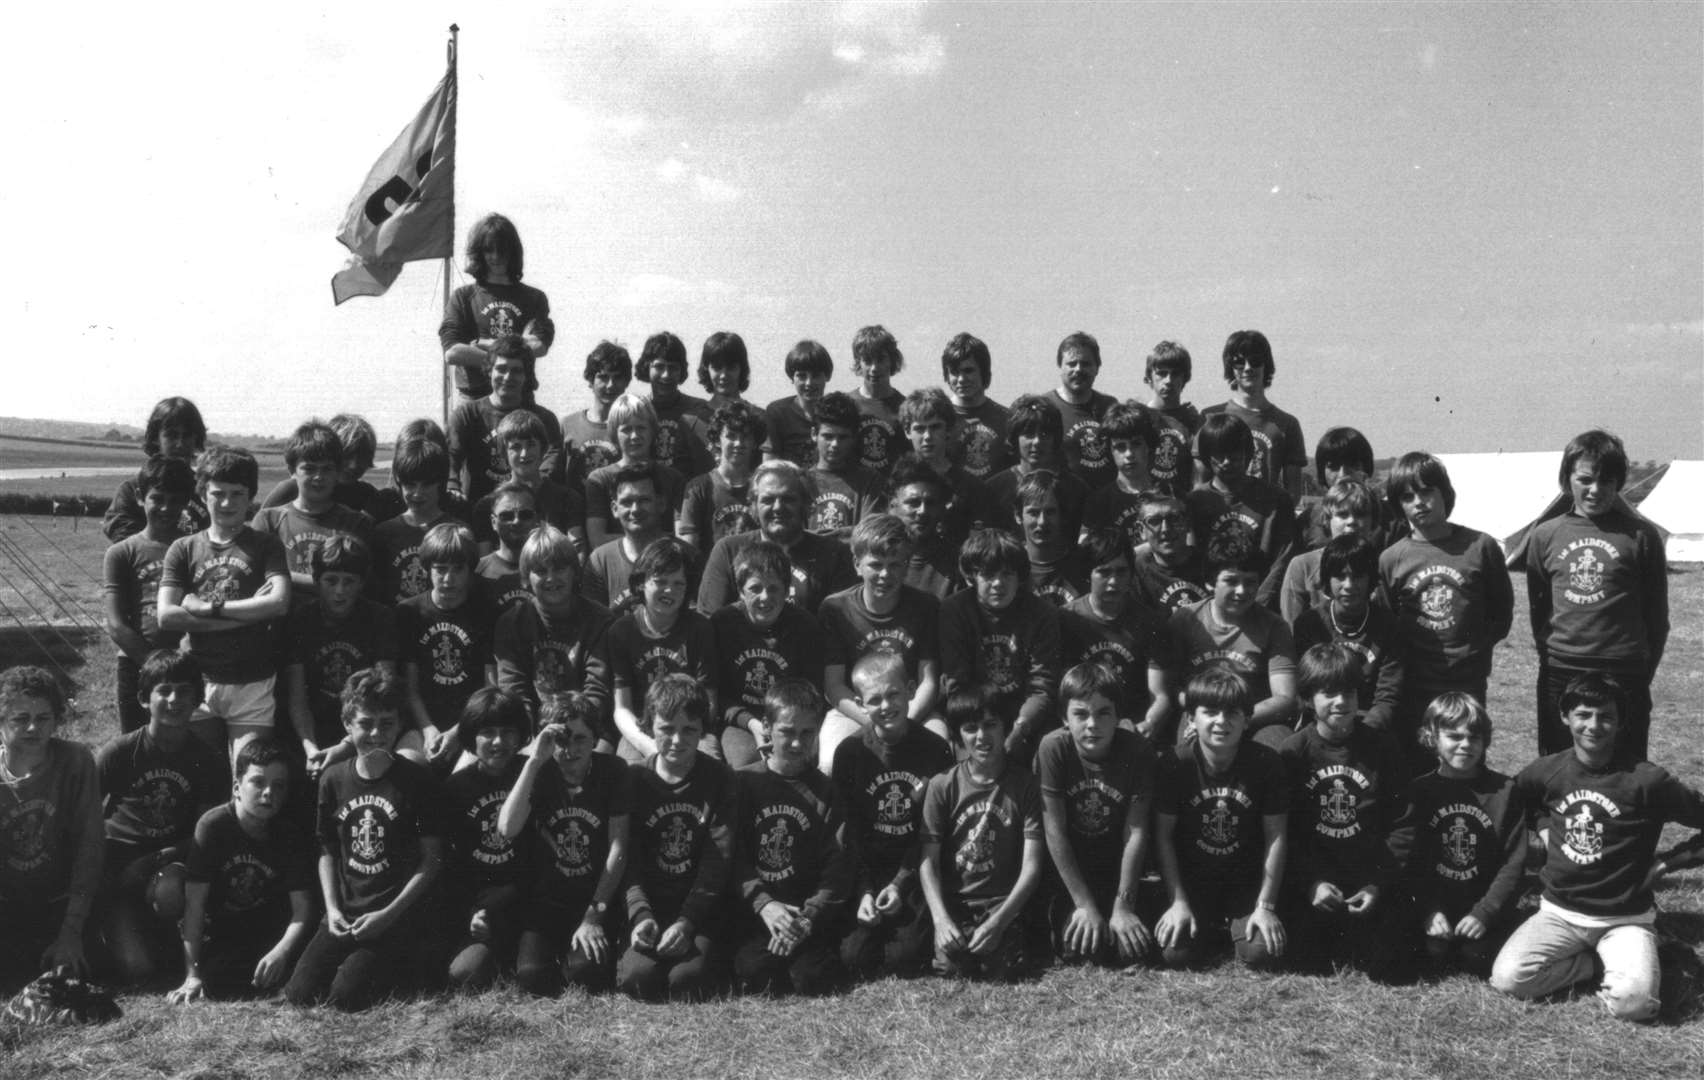 The Boys’ Brigade - pictured here the 1st Maidstone Boys Brigade in the late 1970s or early 80s - were up there with the Scouts back in the day. Picture: Neil Sherry